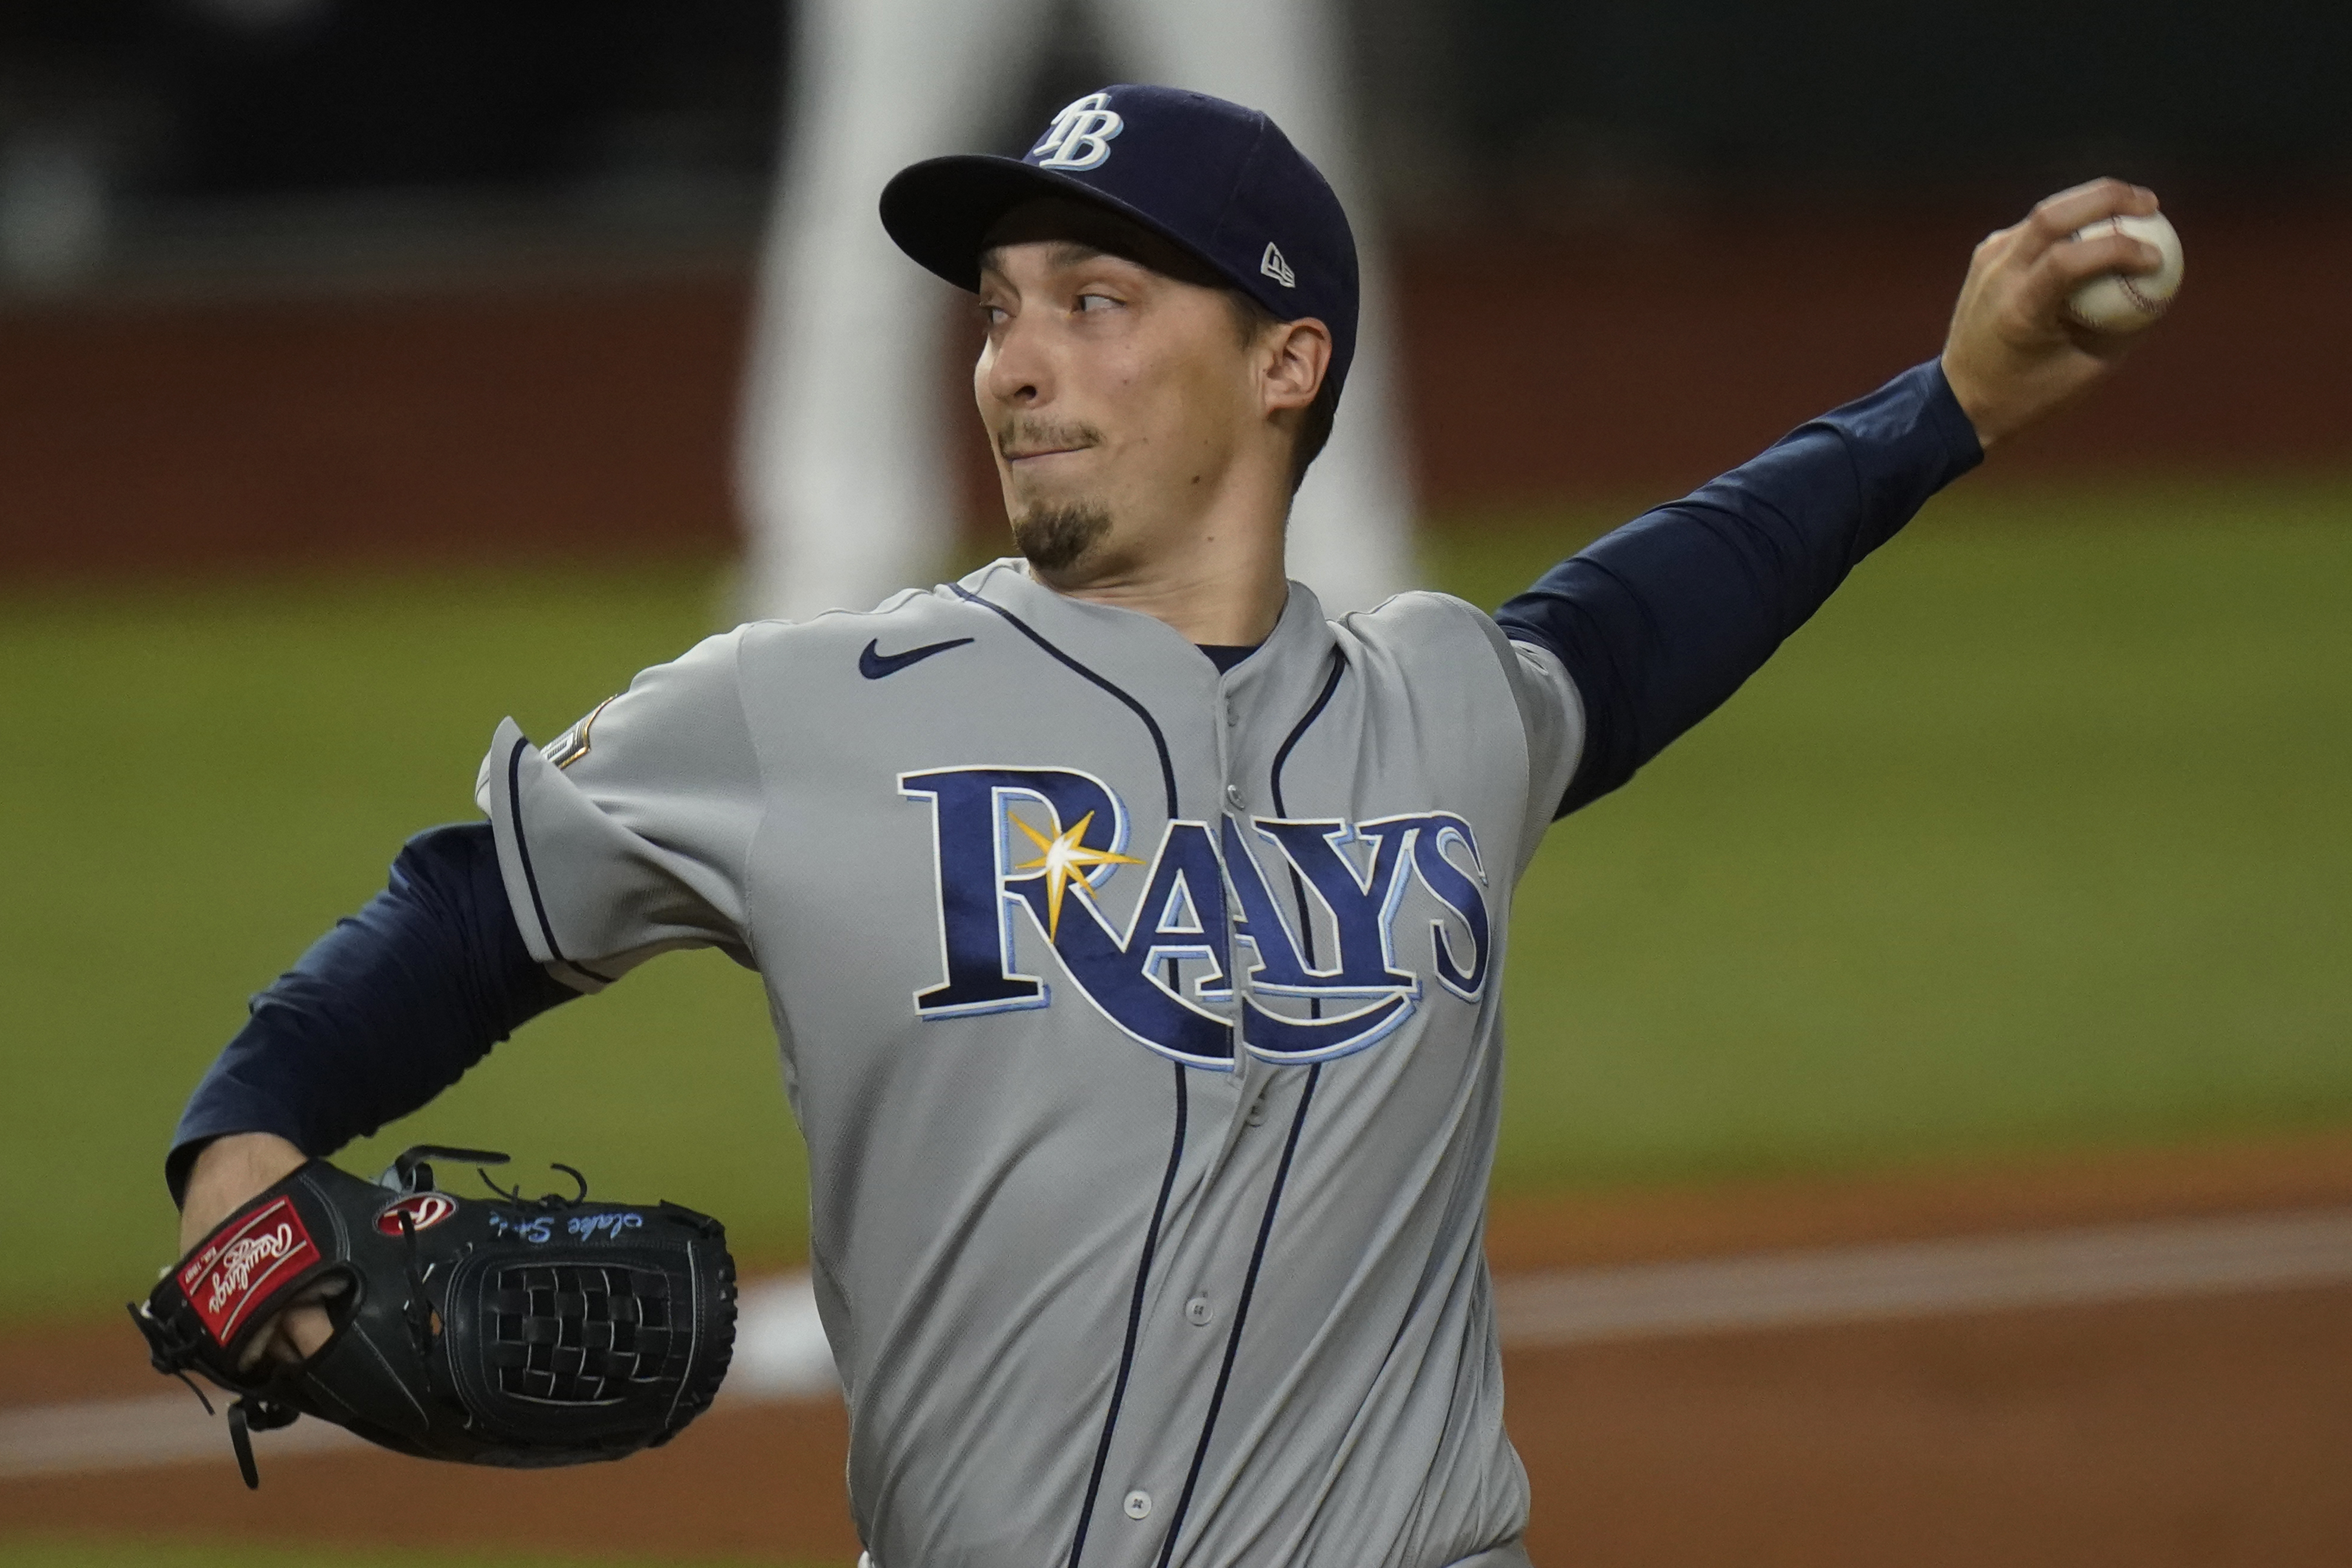 Talking-to by dad helps Rays' Snell reach potential